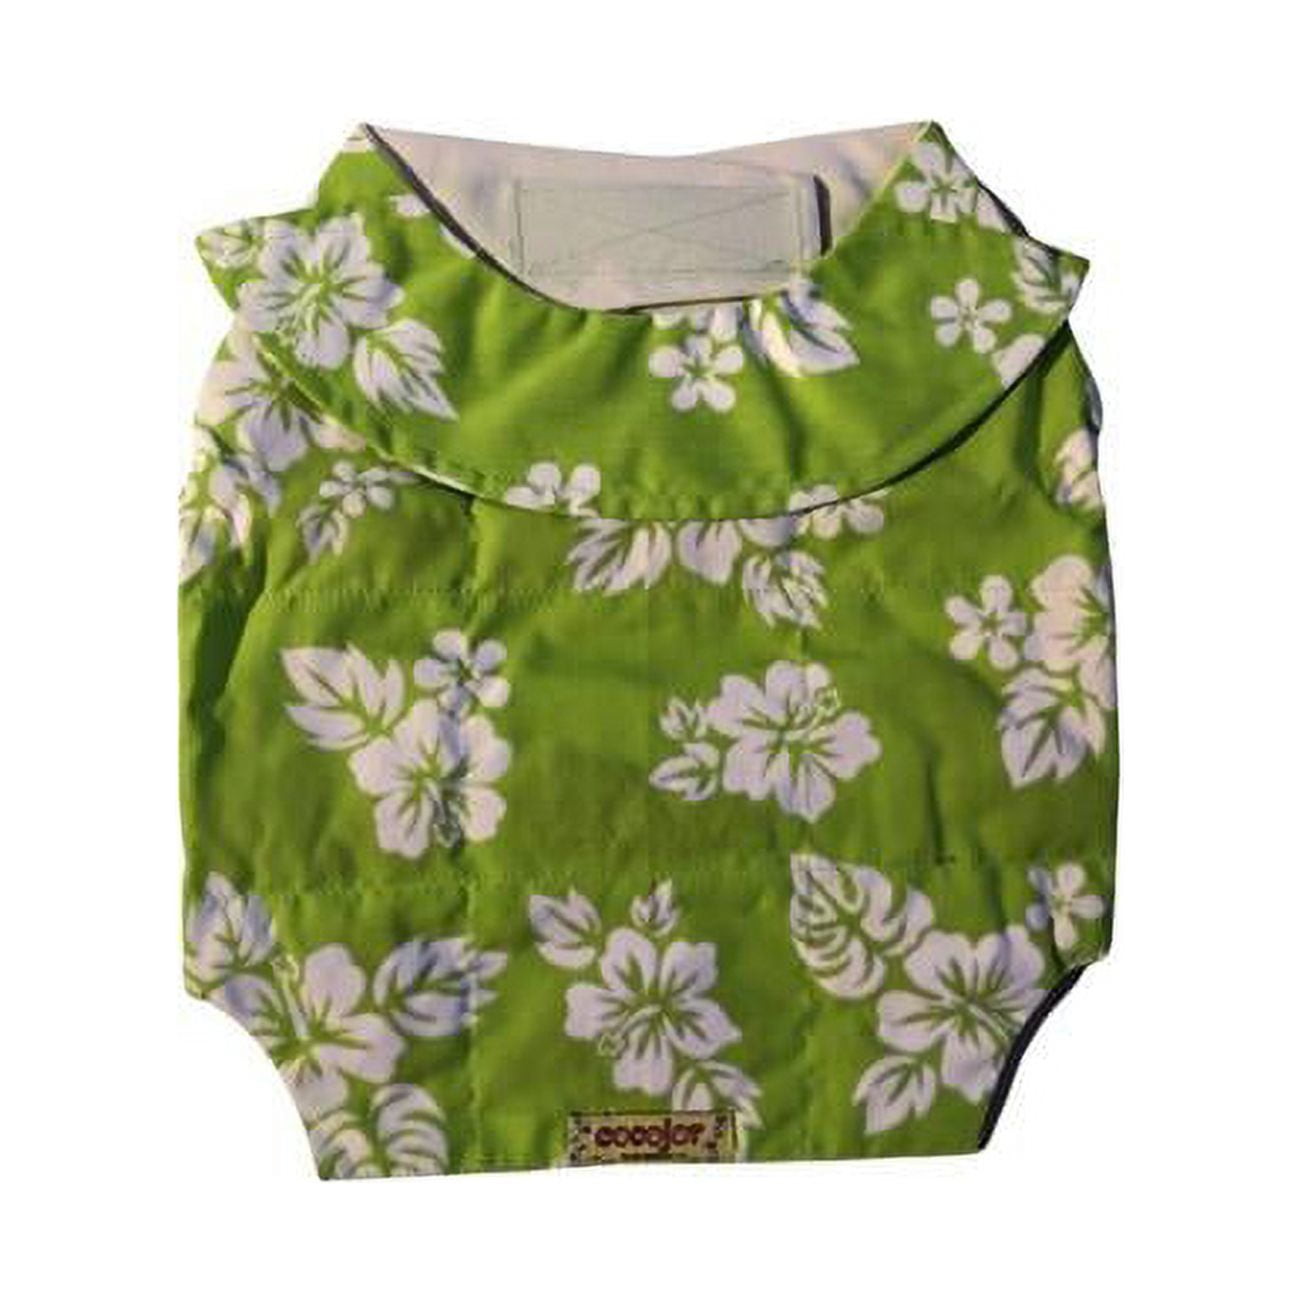 Picture of Cocojor GRN12C357 Hawaii 5-0 Cooling Vest for Dog, Green - Large